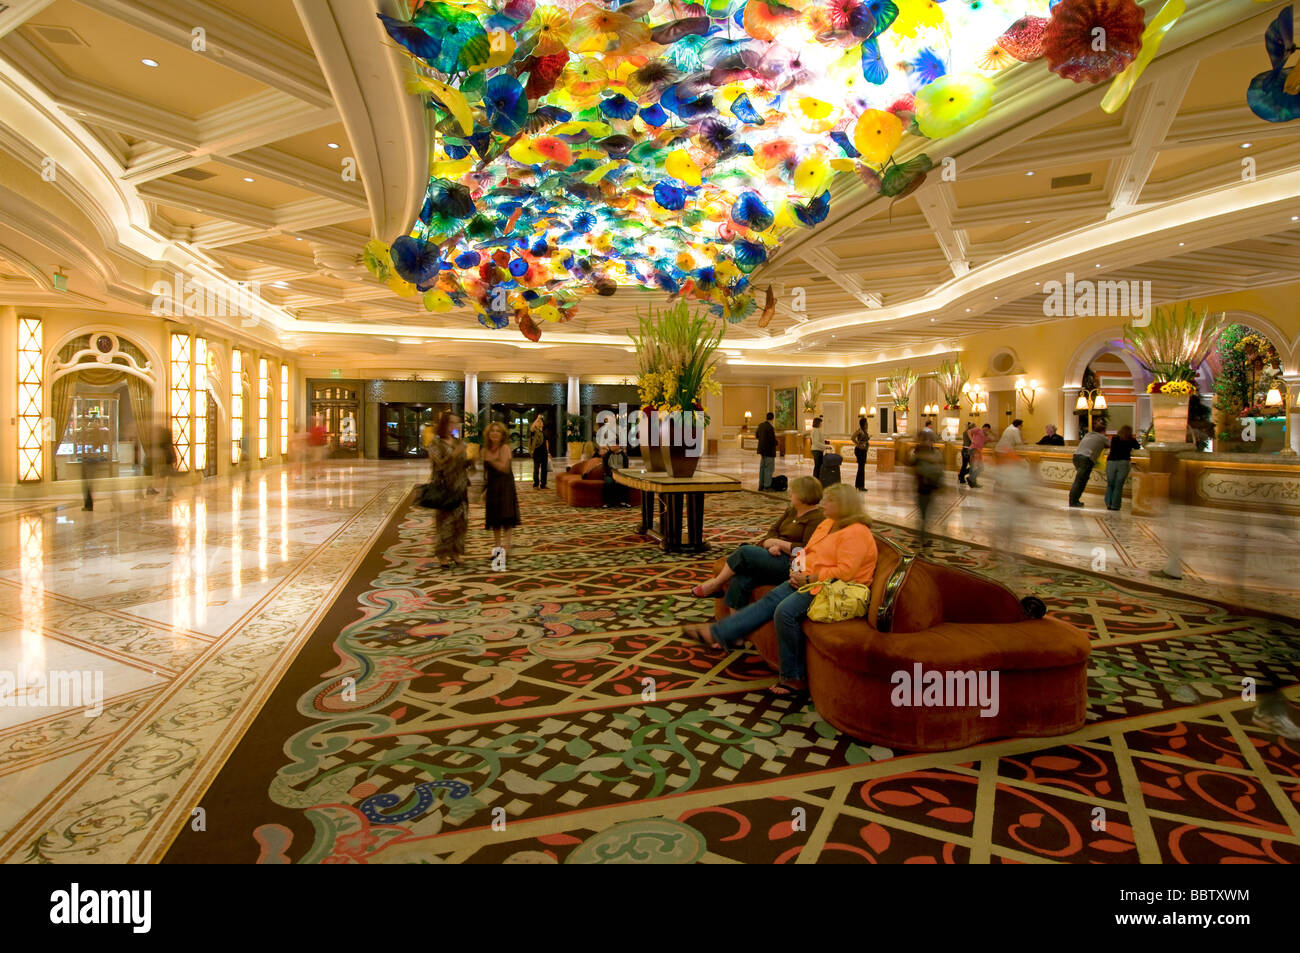 Venetian glass sculpture on the ceiling of the Bellagio Resort and Casino Las Vegas Nevada Stock Photo